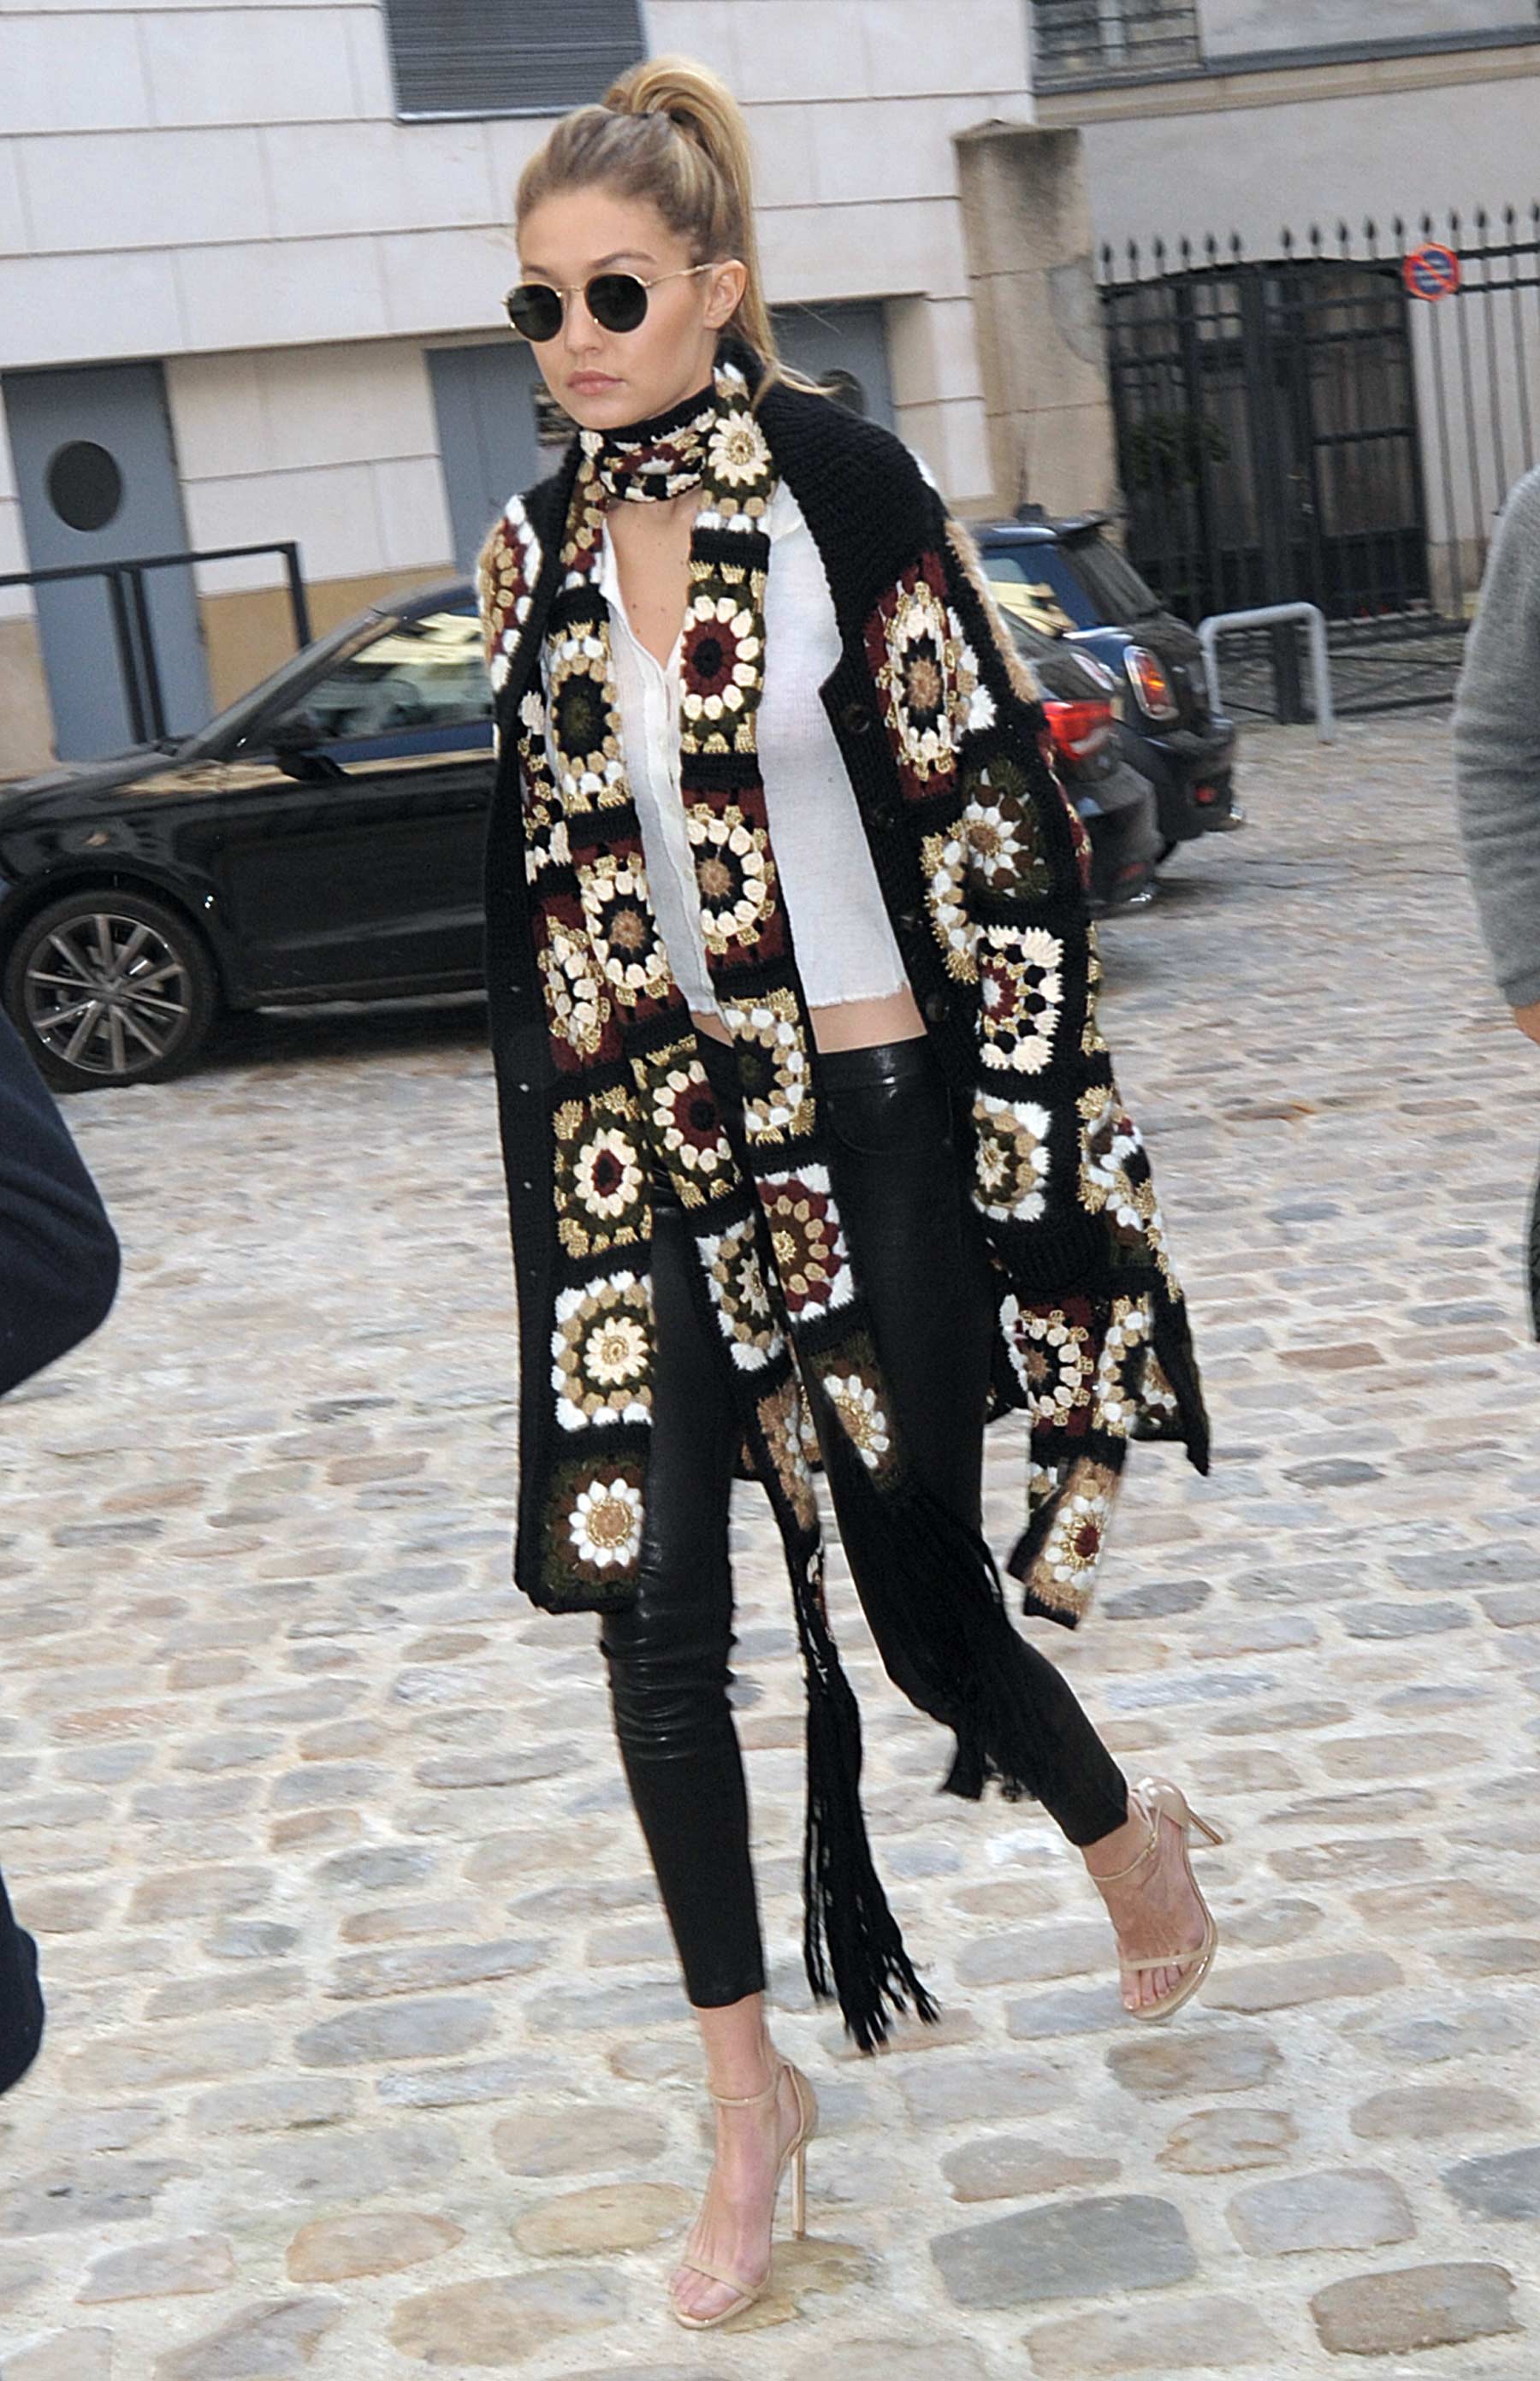 Gigi Hadid leaves her hotel to attend Men’s Fashion Week in Paris